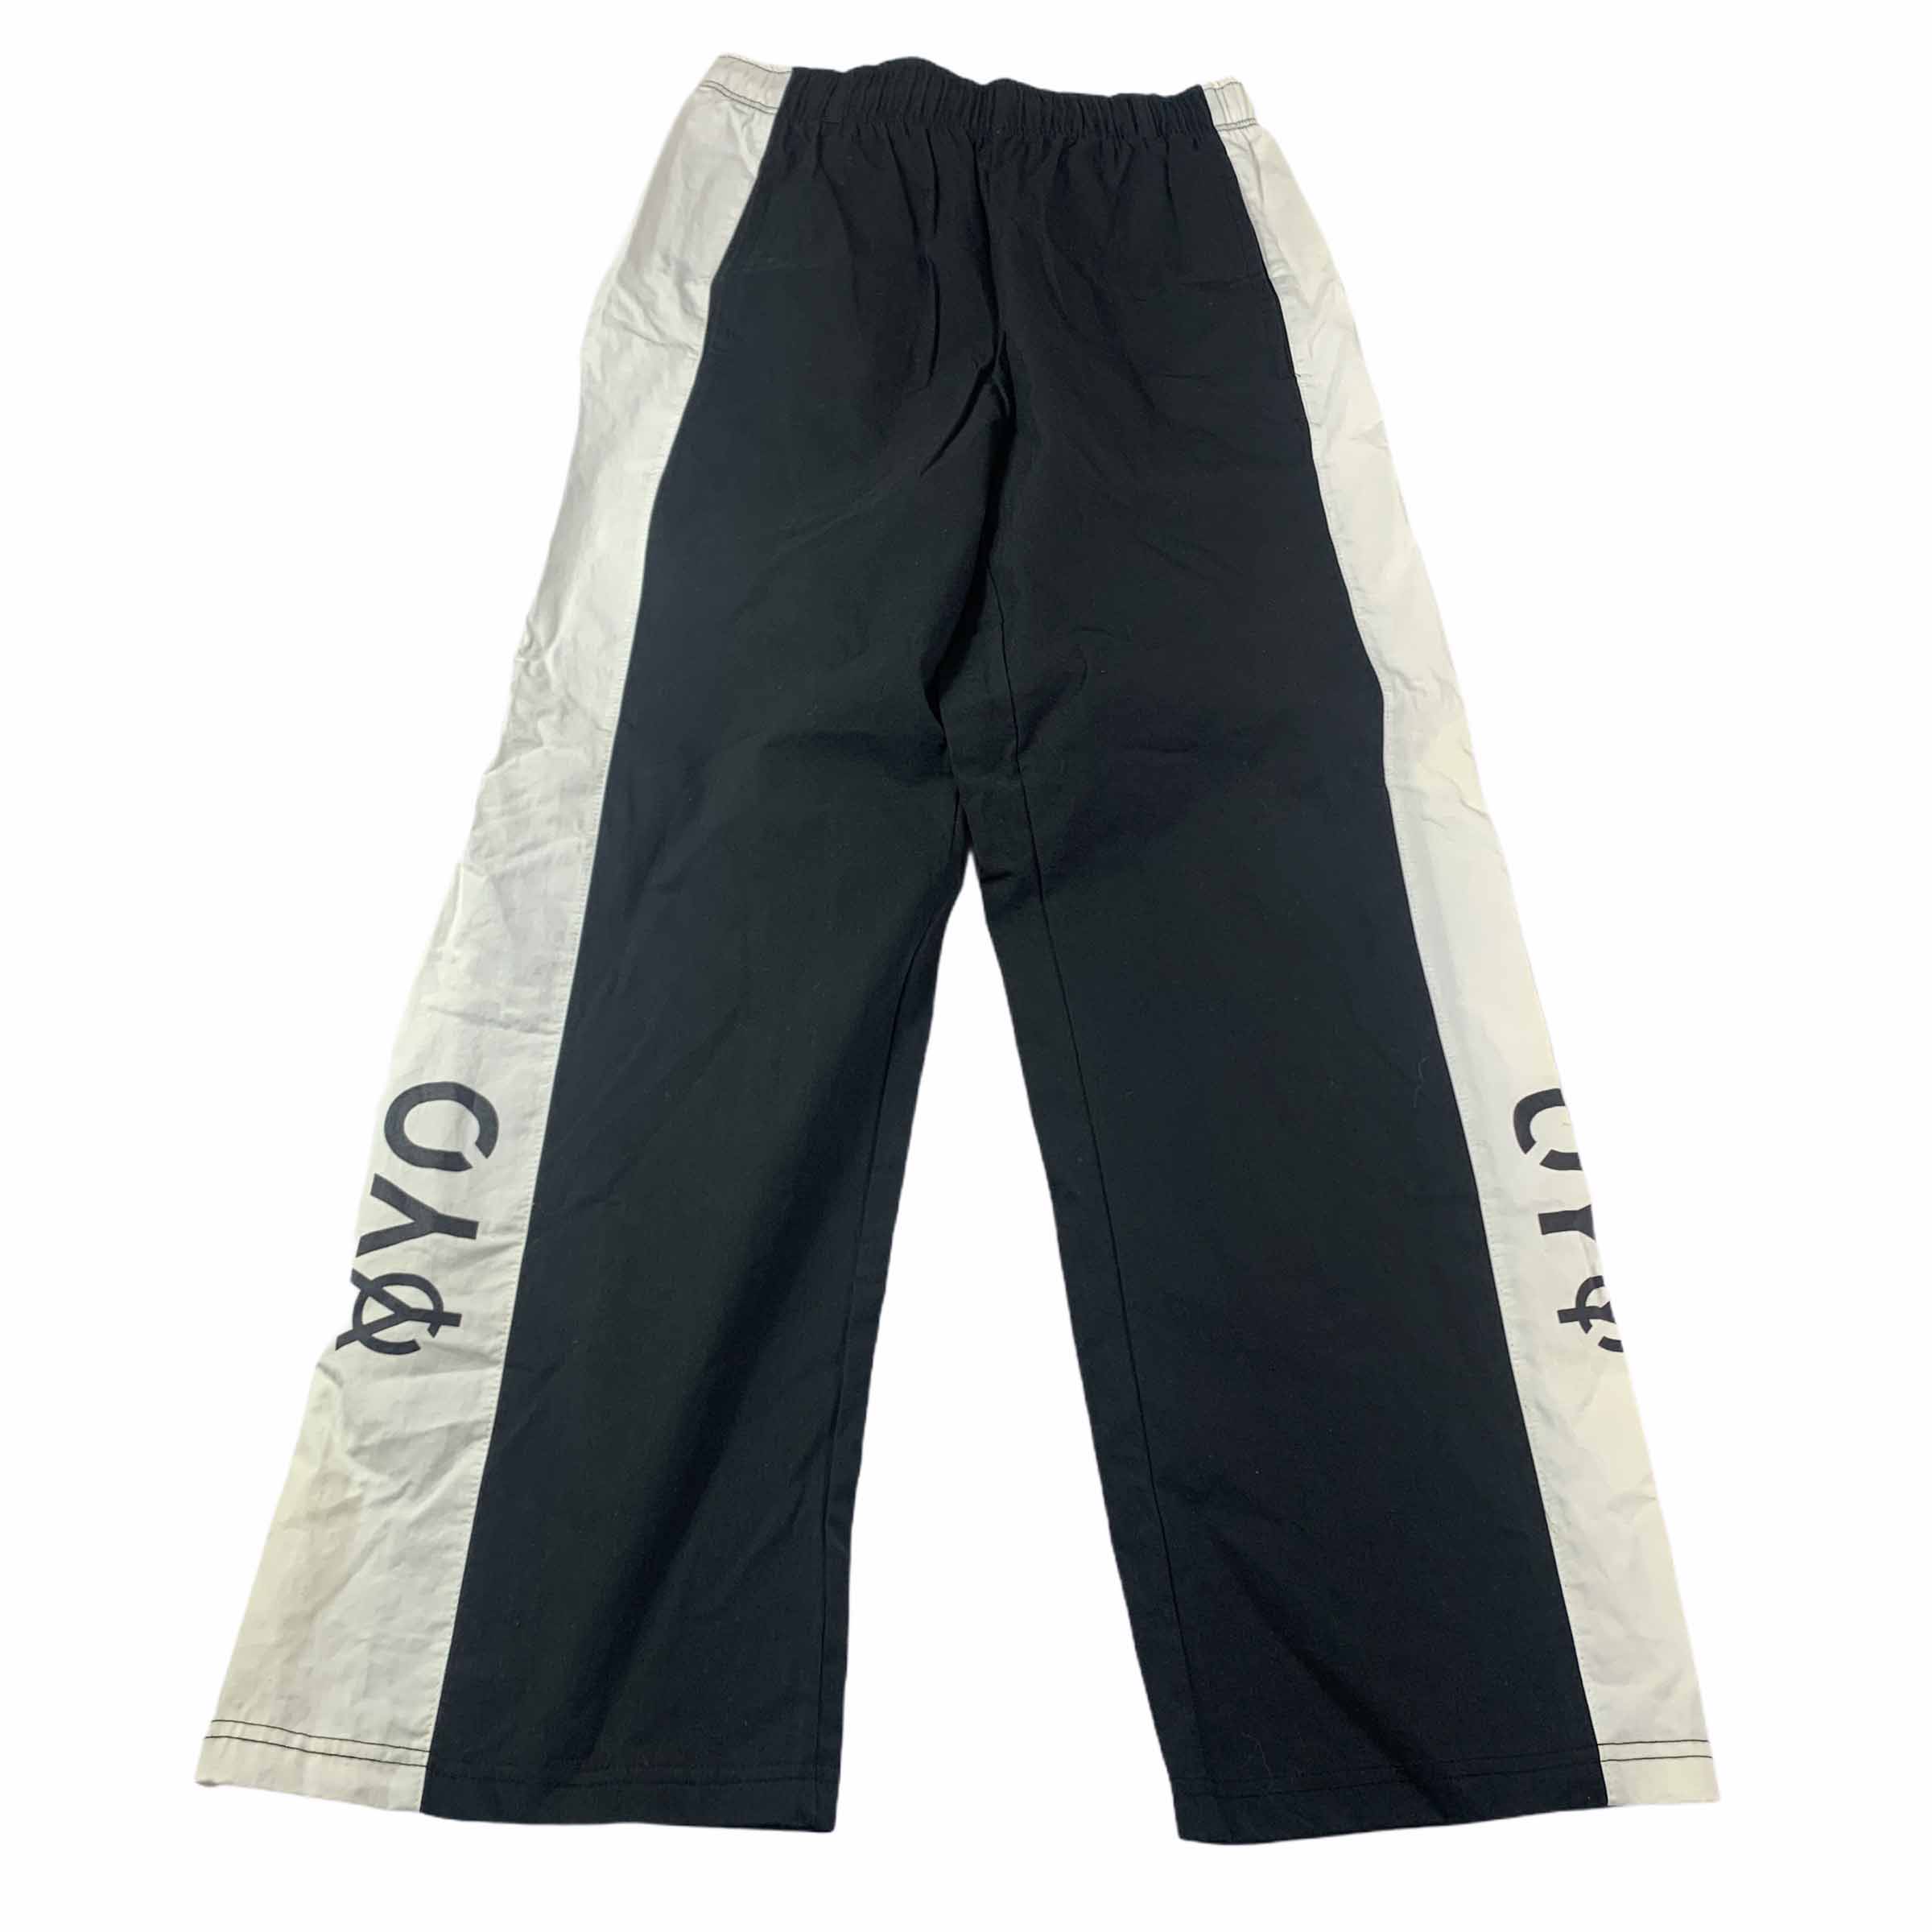 [OY] Side button track pants - Size Free